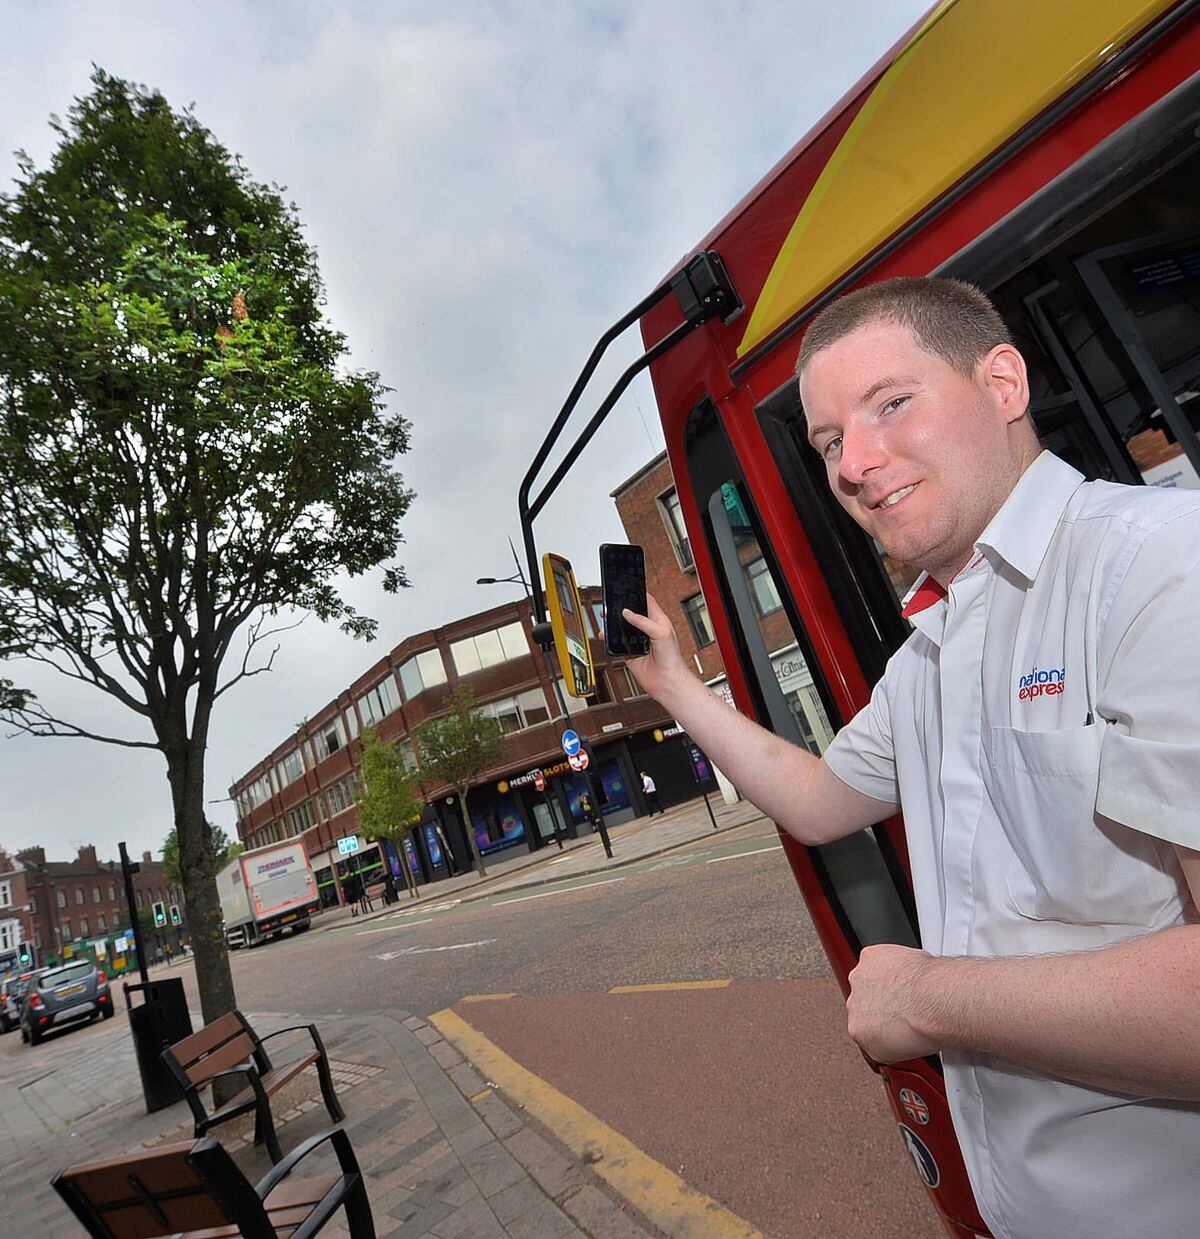 A beehive at a bus stop in the middle of Wolverhampton has been creating a buzz. Bus driver Matthew Hubball, of Codsall, even joined passengers and shoppers in taking a snap of the swarm in Market Street.